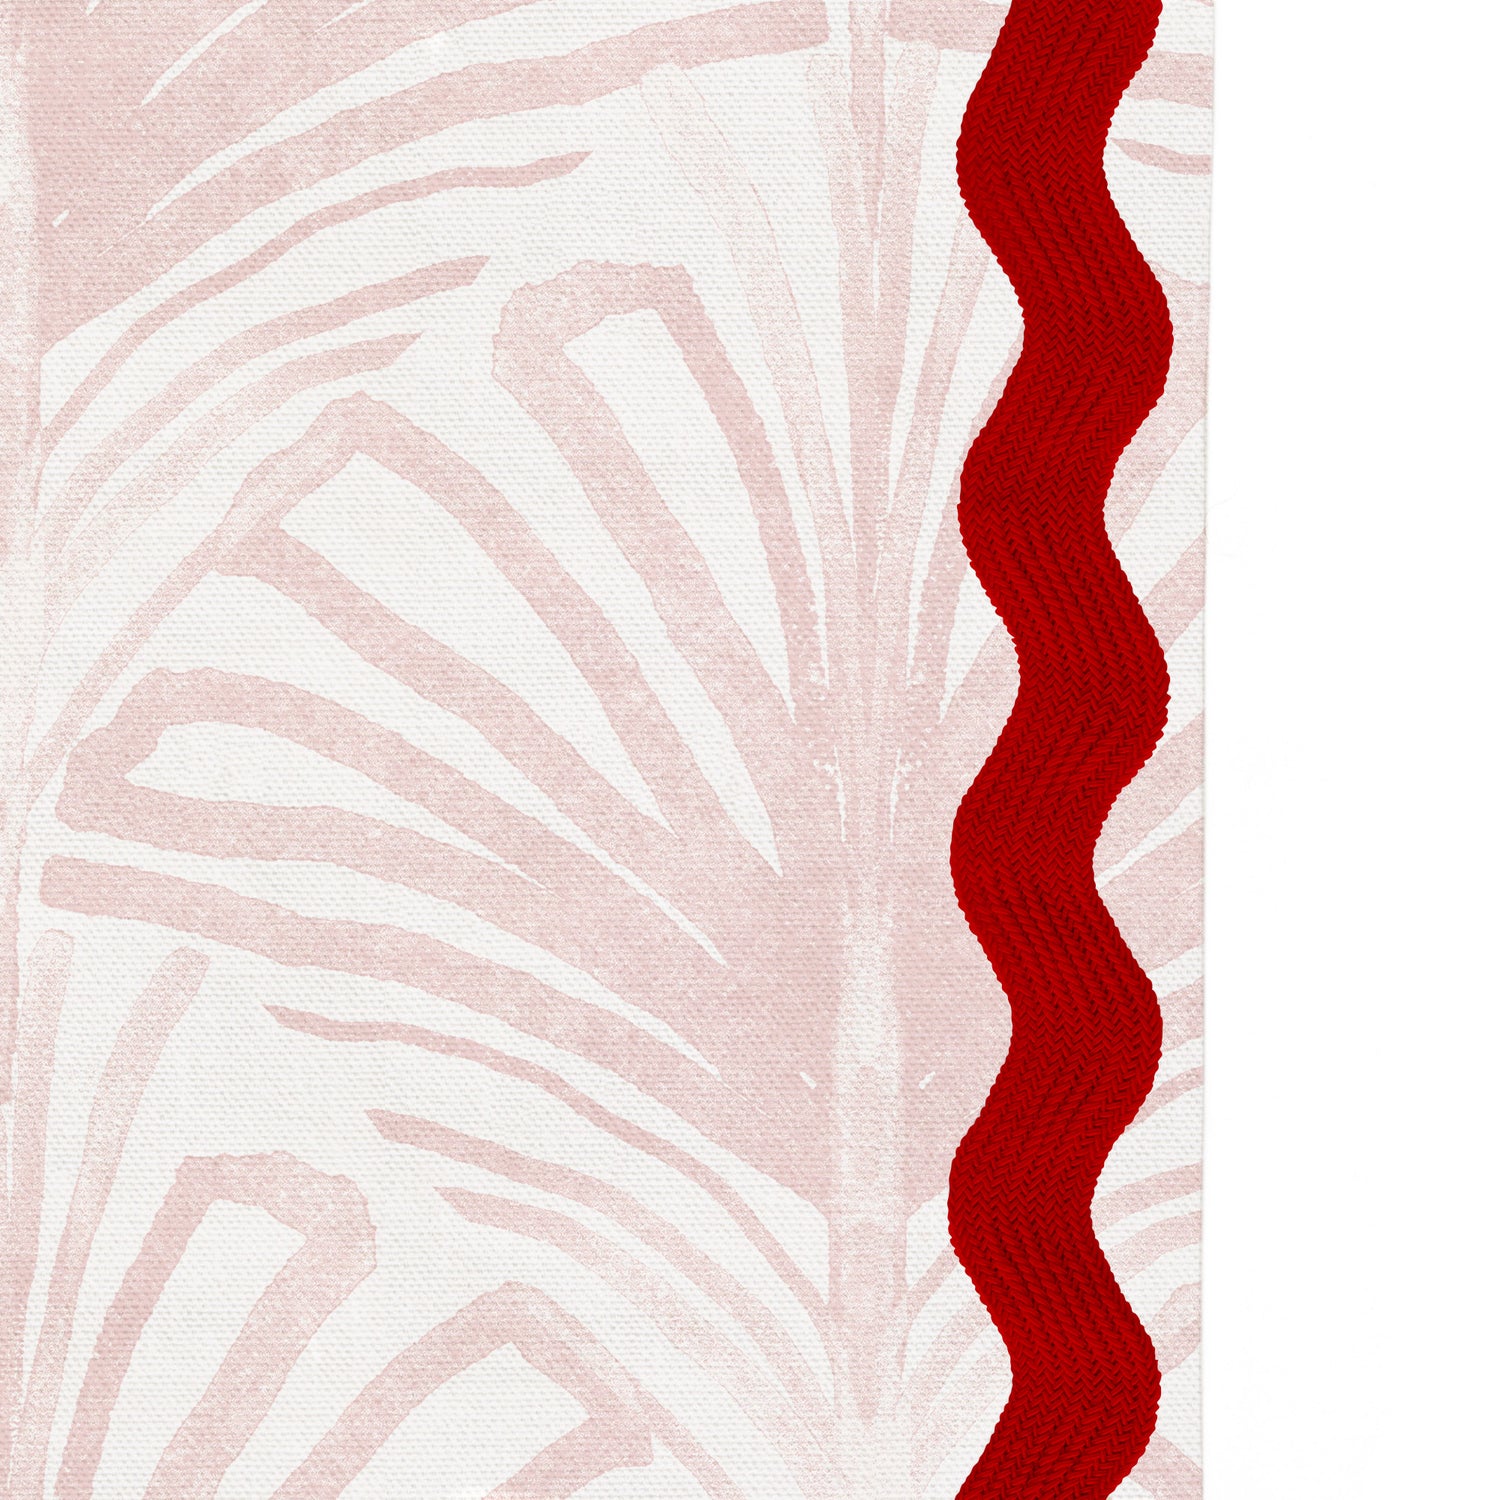 Upclose picture of Suzy Rose custom shower curtain with cherry rick rack trim